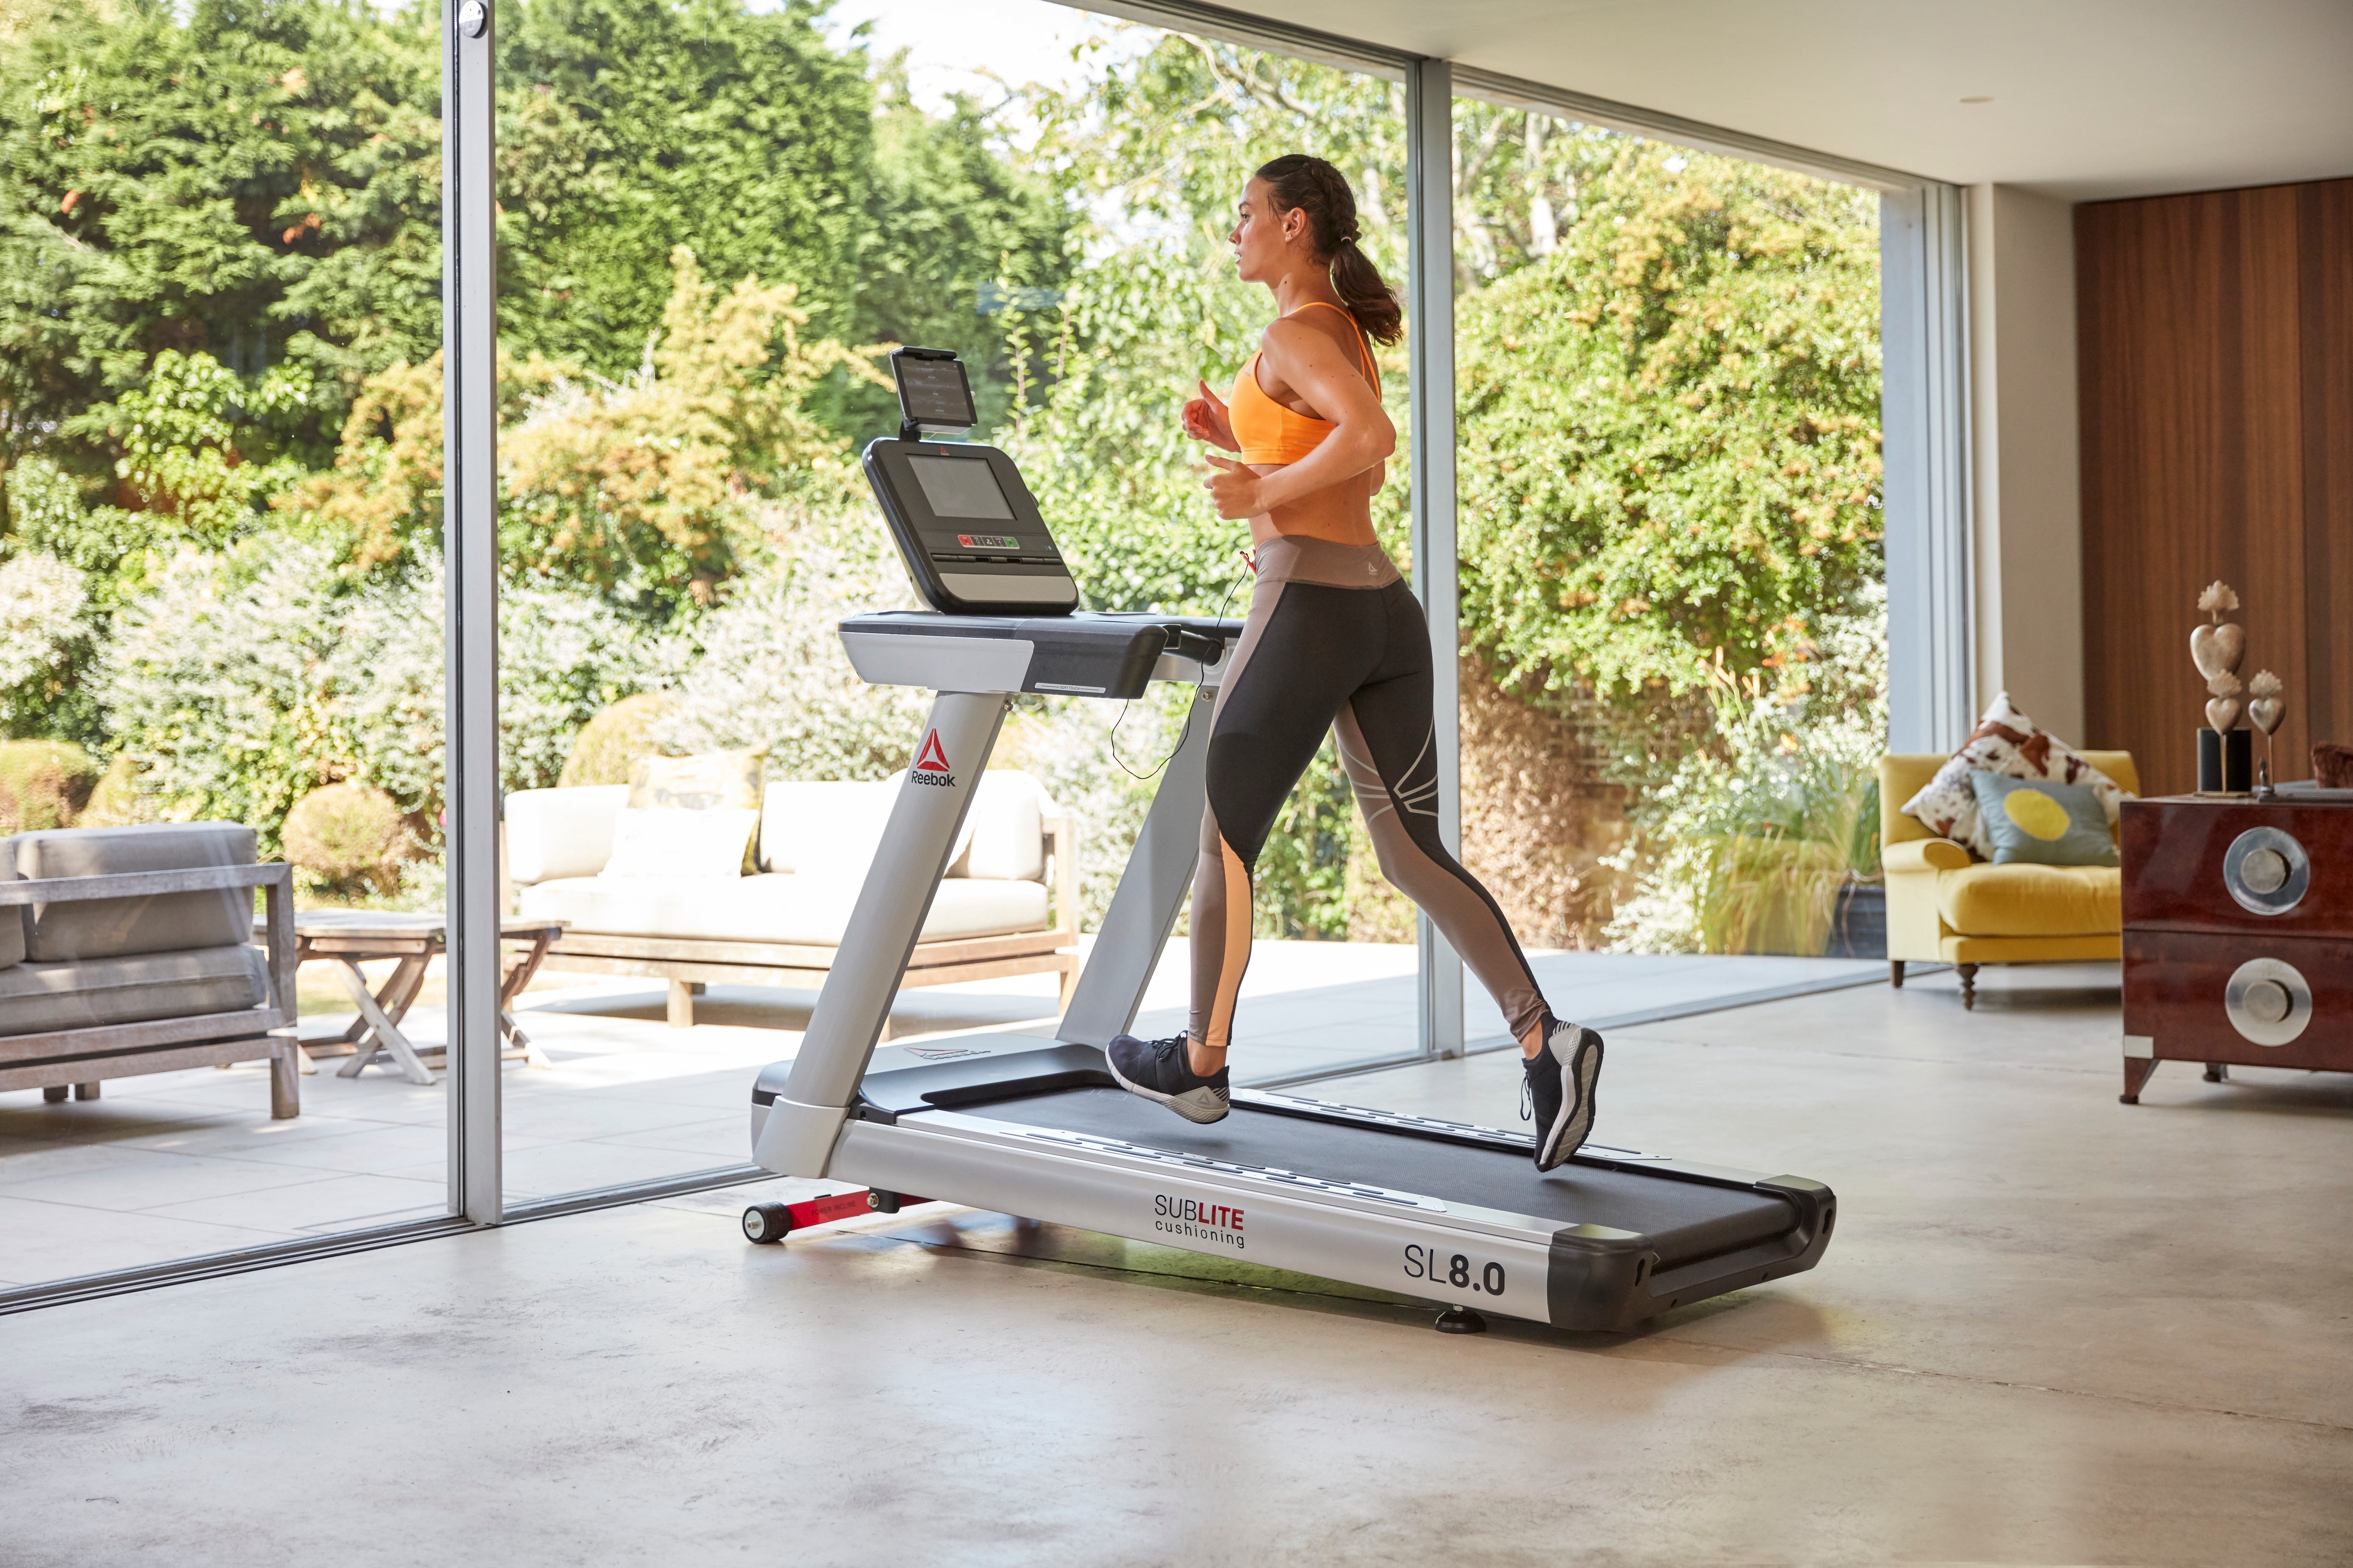  Treadmill for Home Use